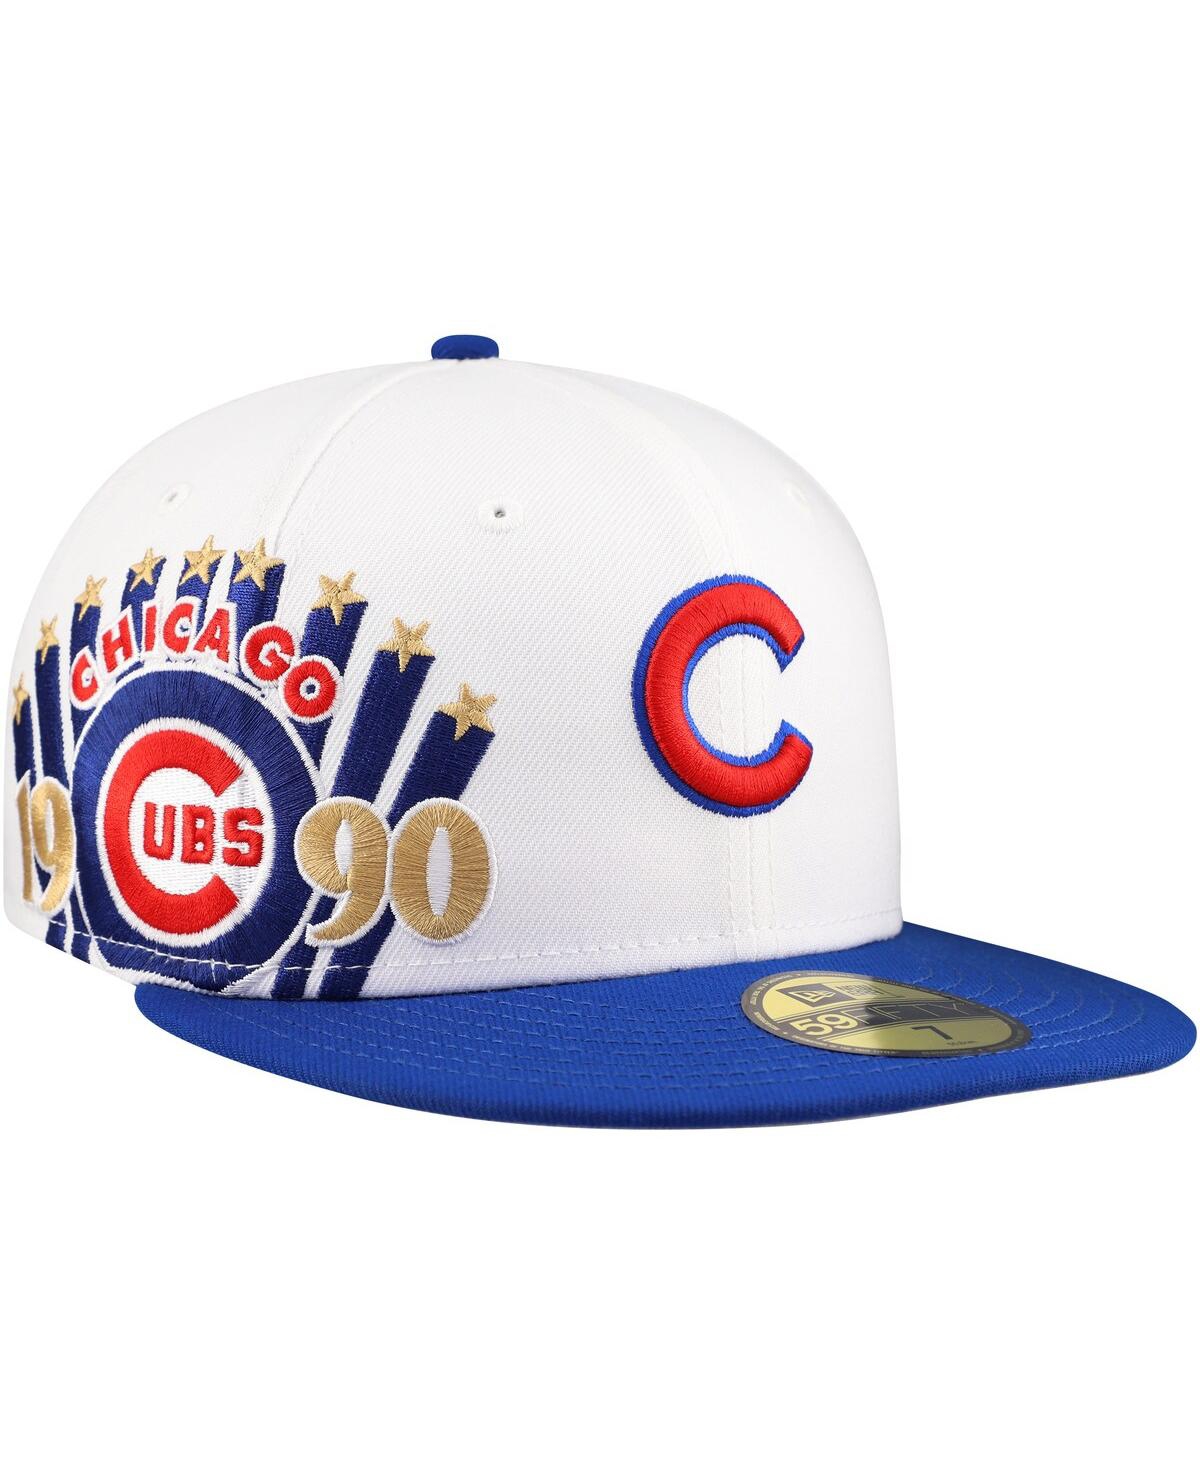 Men's White/Royal Chicago Cubs Major Sidepatch 59FIFTY Fitted Hat - White, Royal